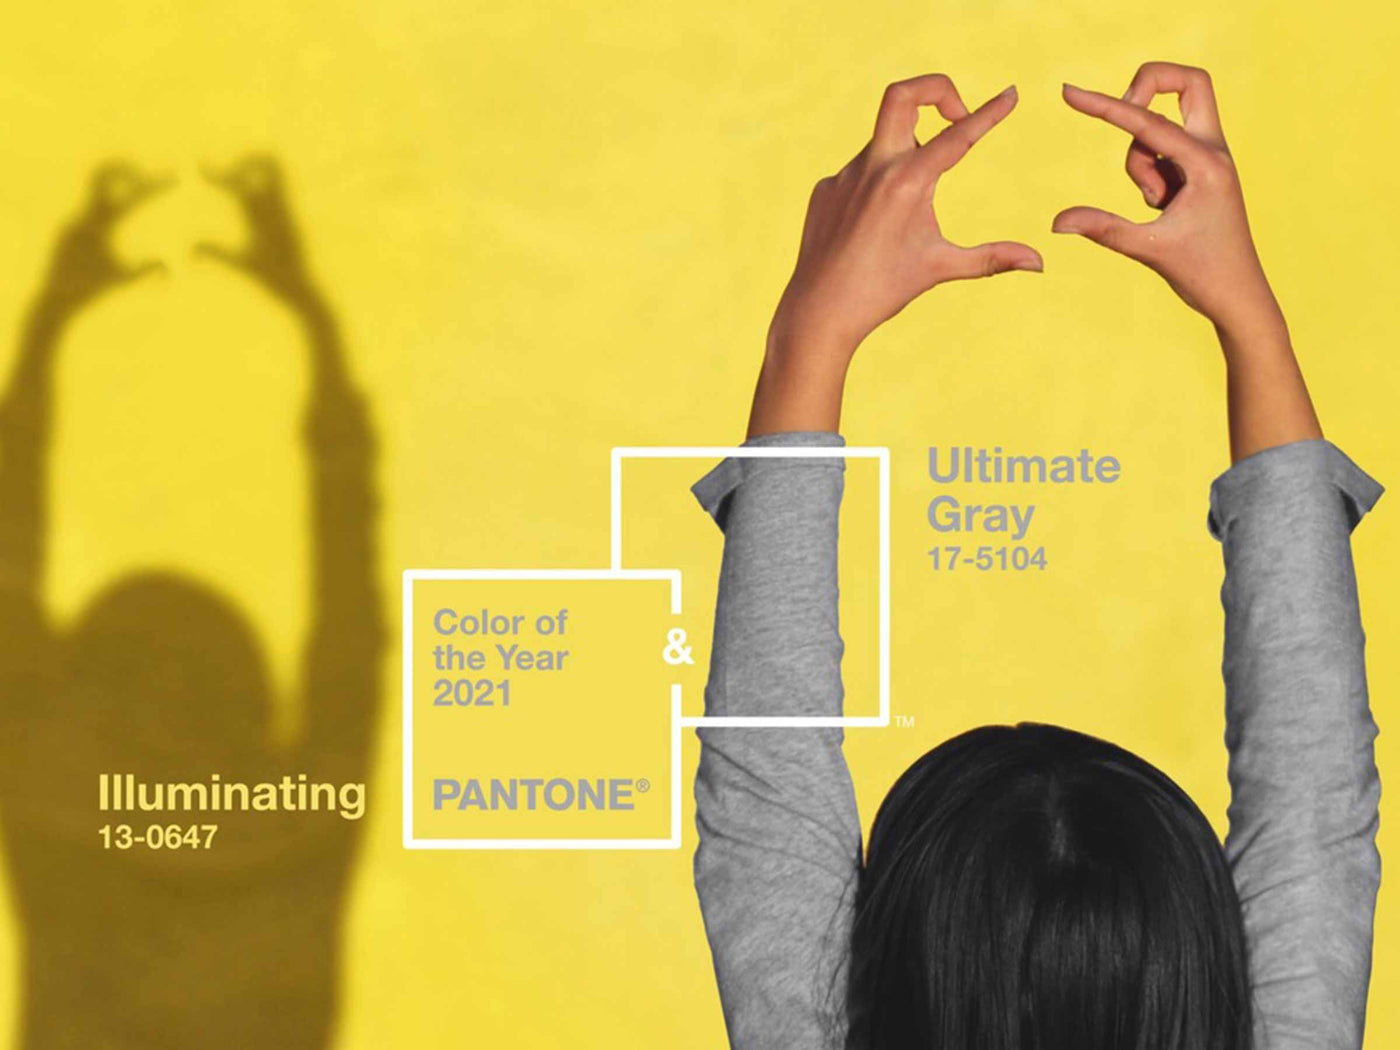 Decorating Your Home with Pantone’s Color of the Year: Ultimate Gray